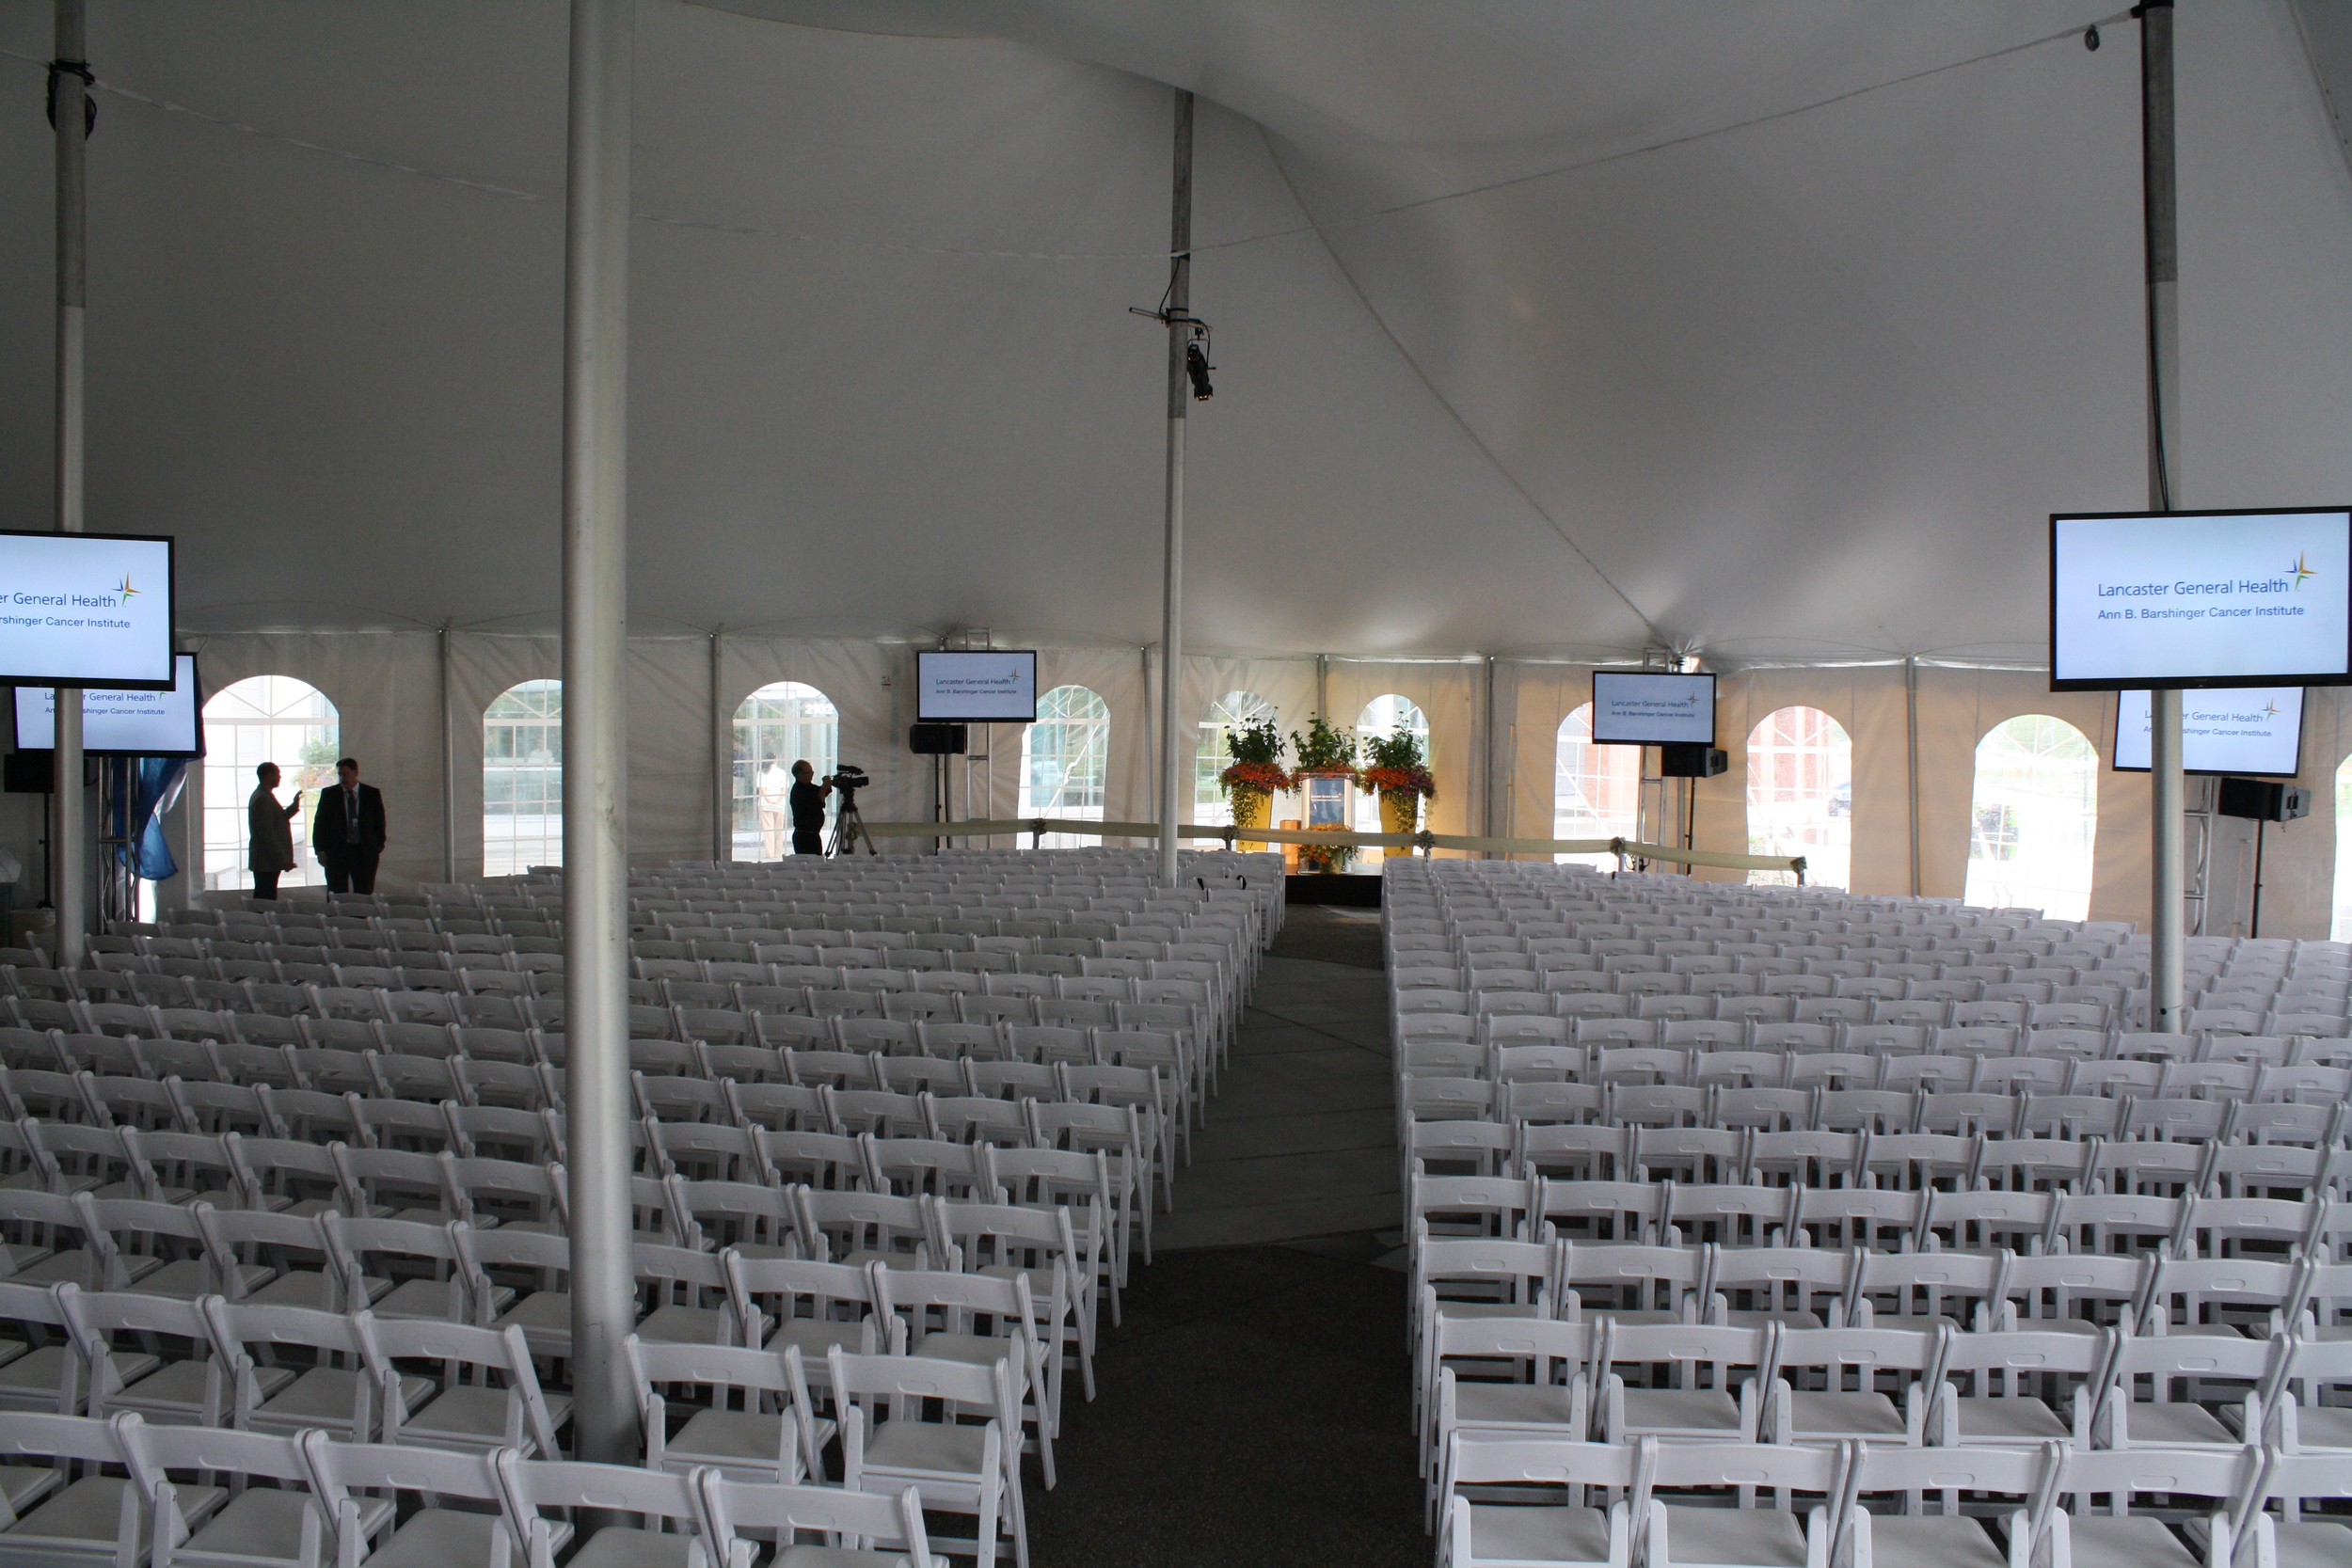 Government tent with crowd seating for large events